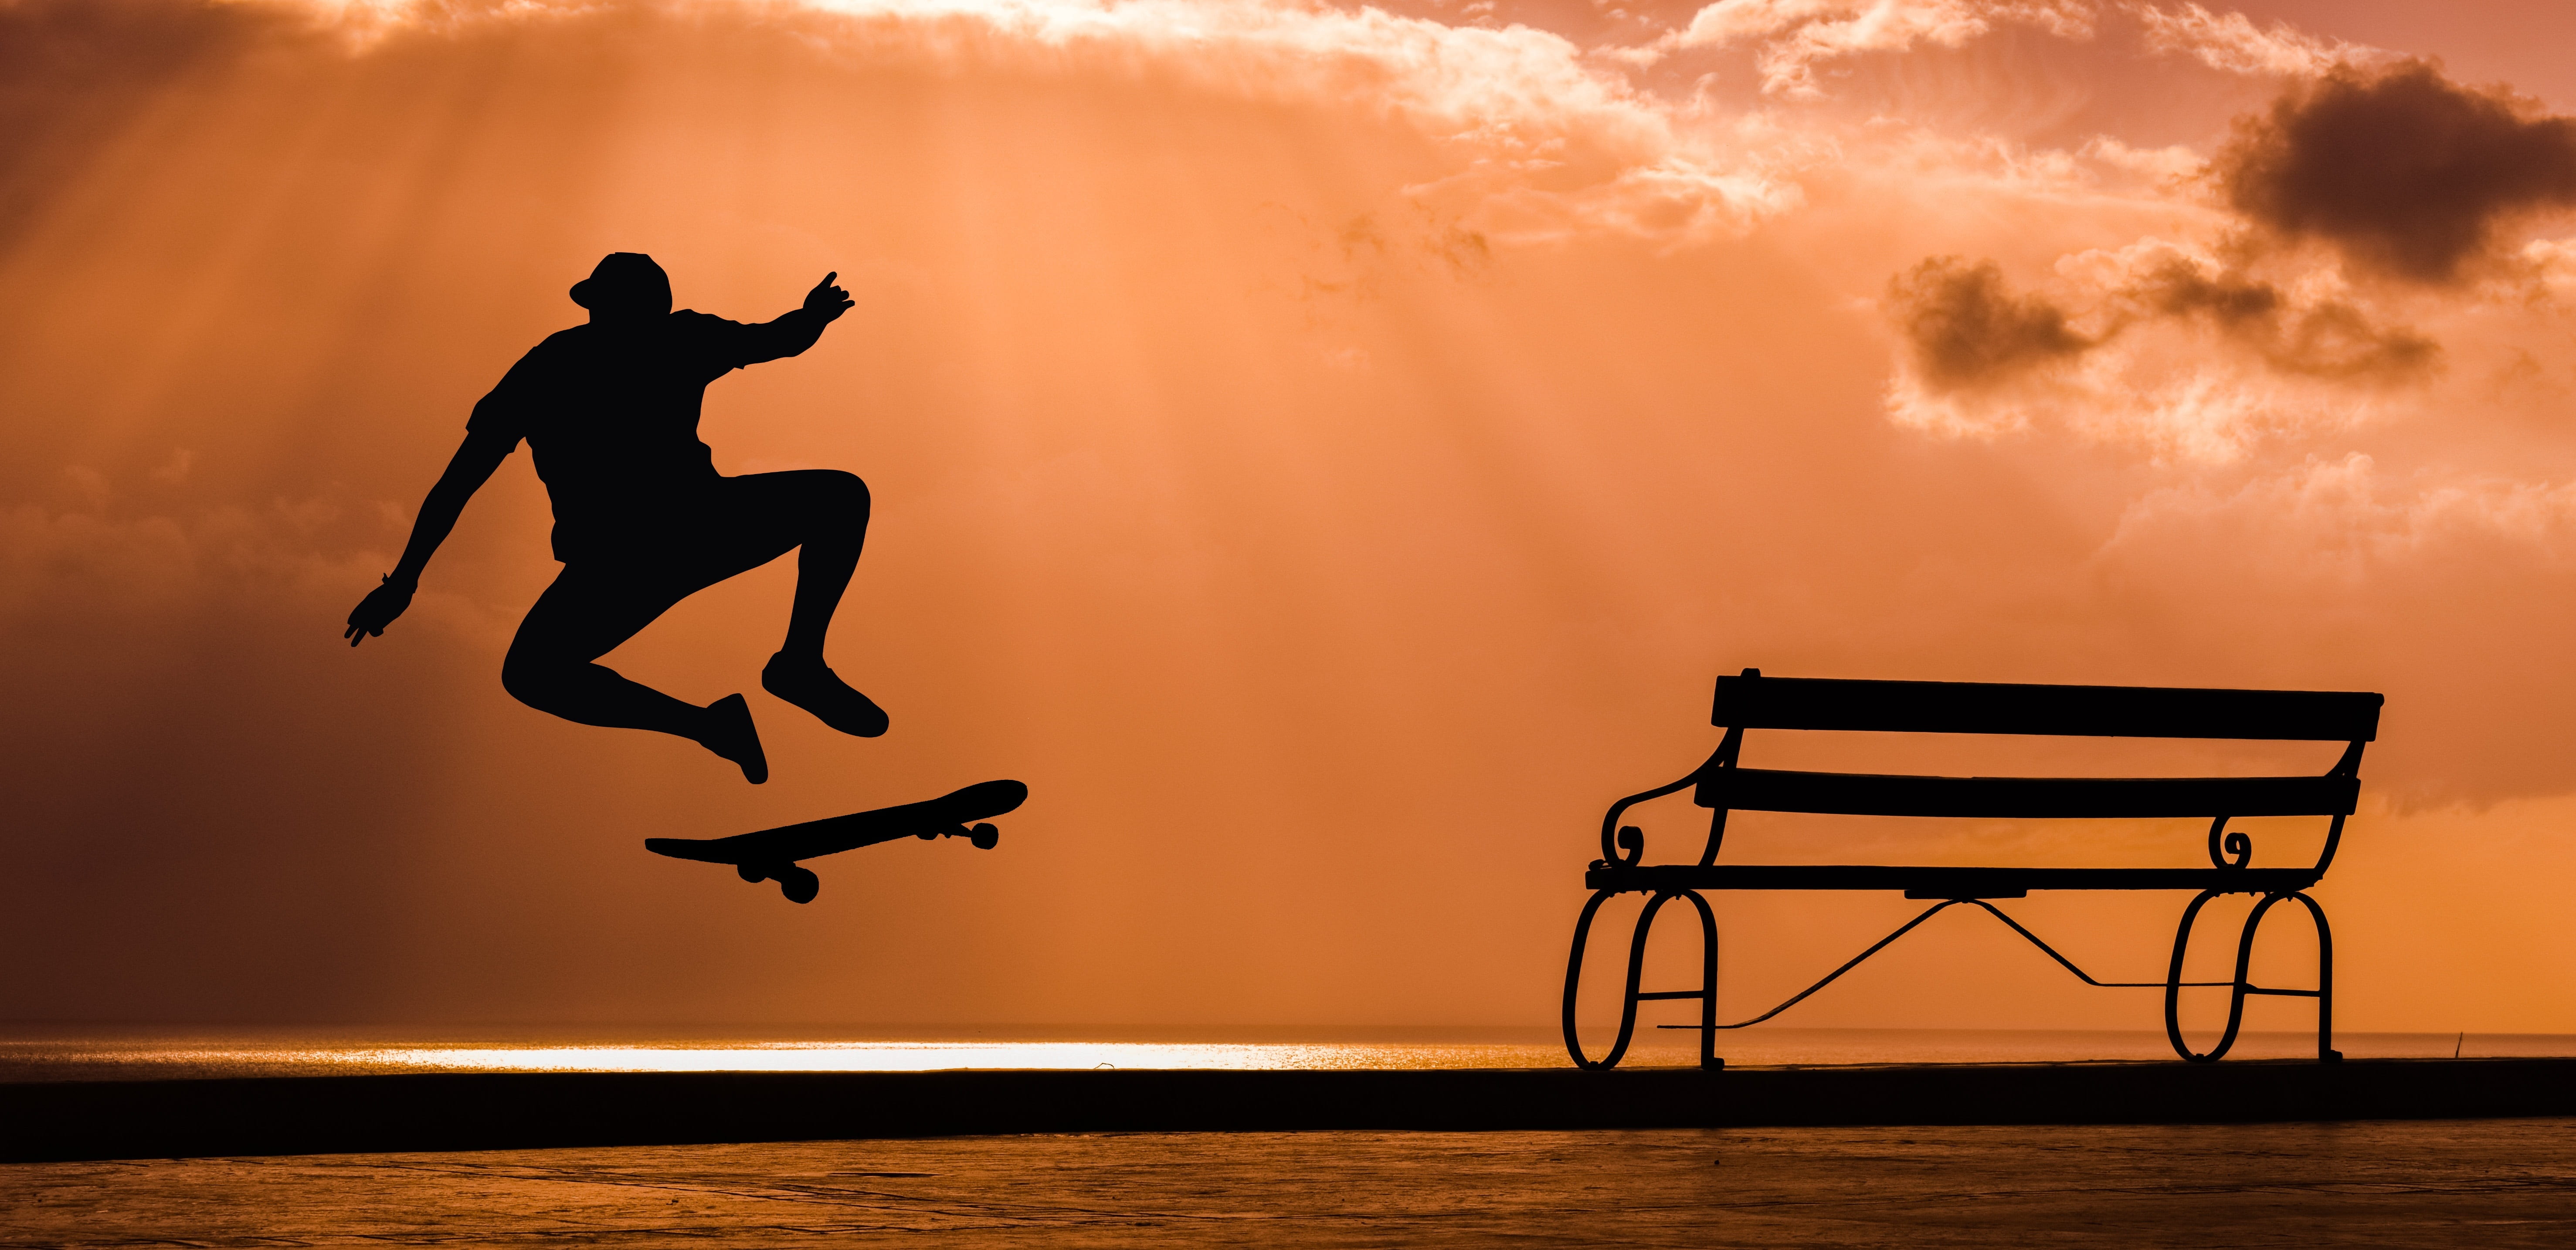 silhouette of person playing skateboard during golden hour, skateboarder